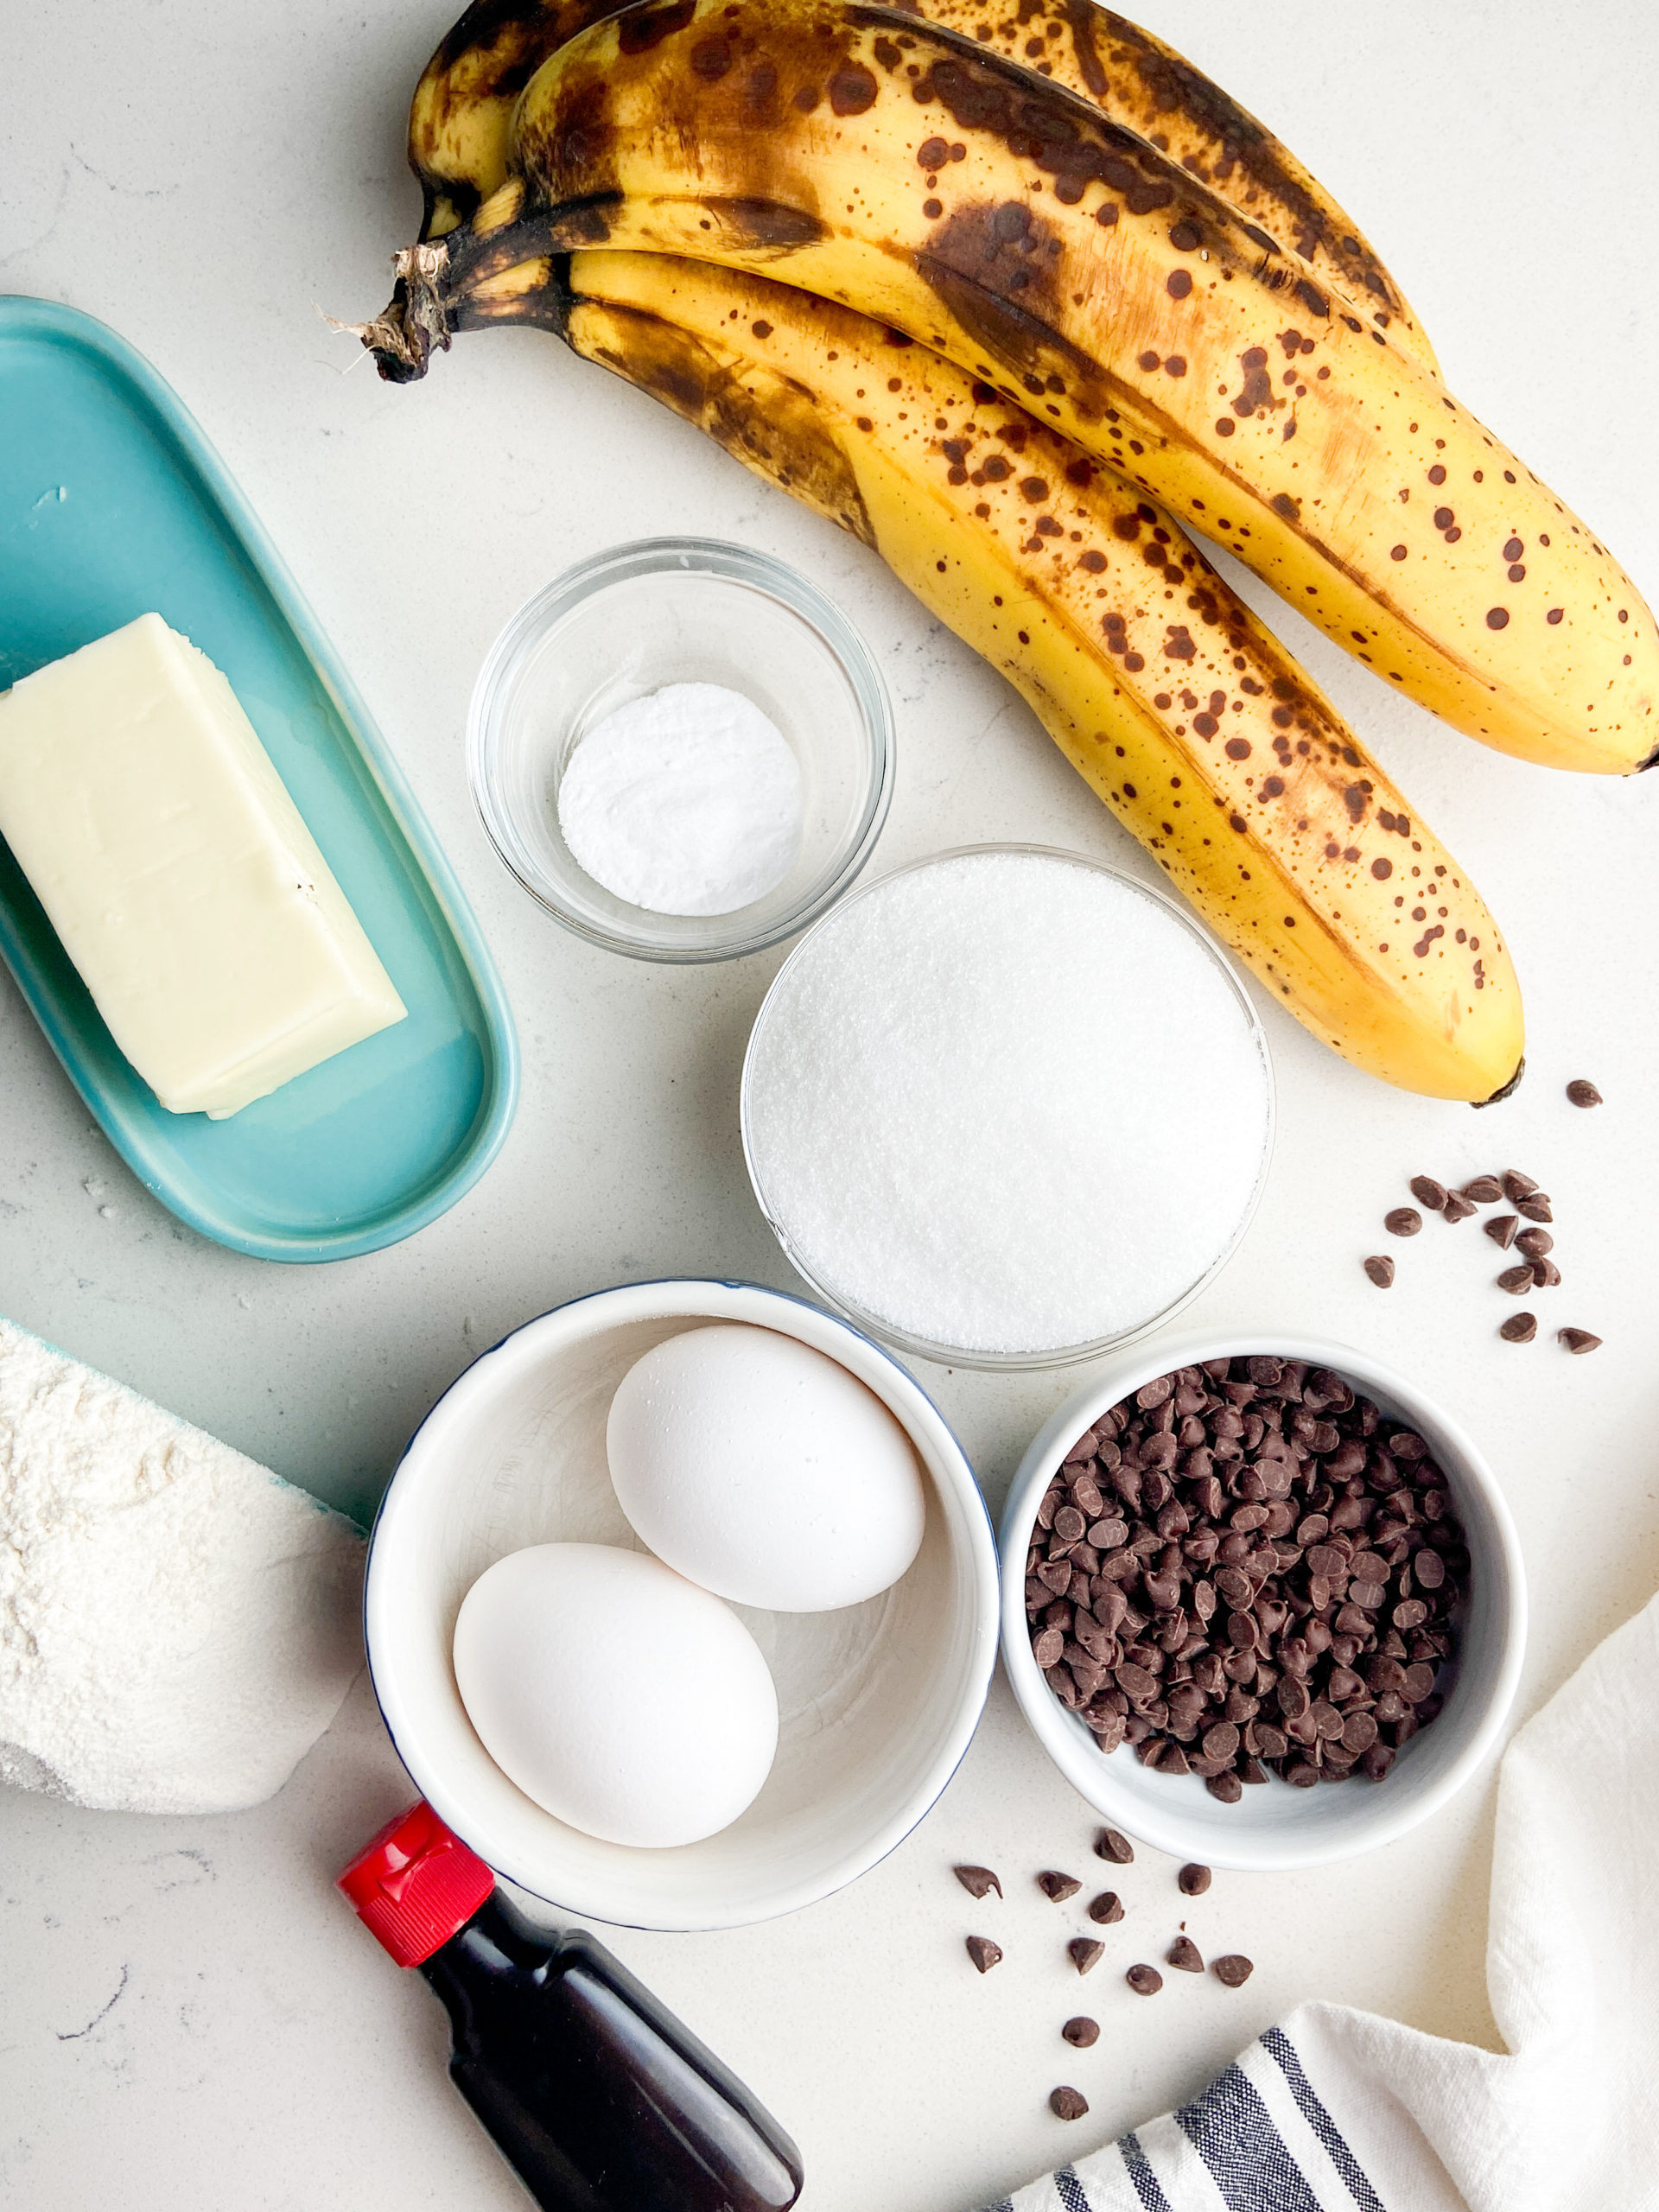 Overhead photo of ingredients needed to make chocolate chip banana bread.